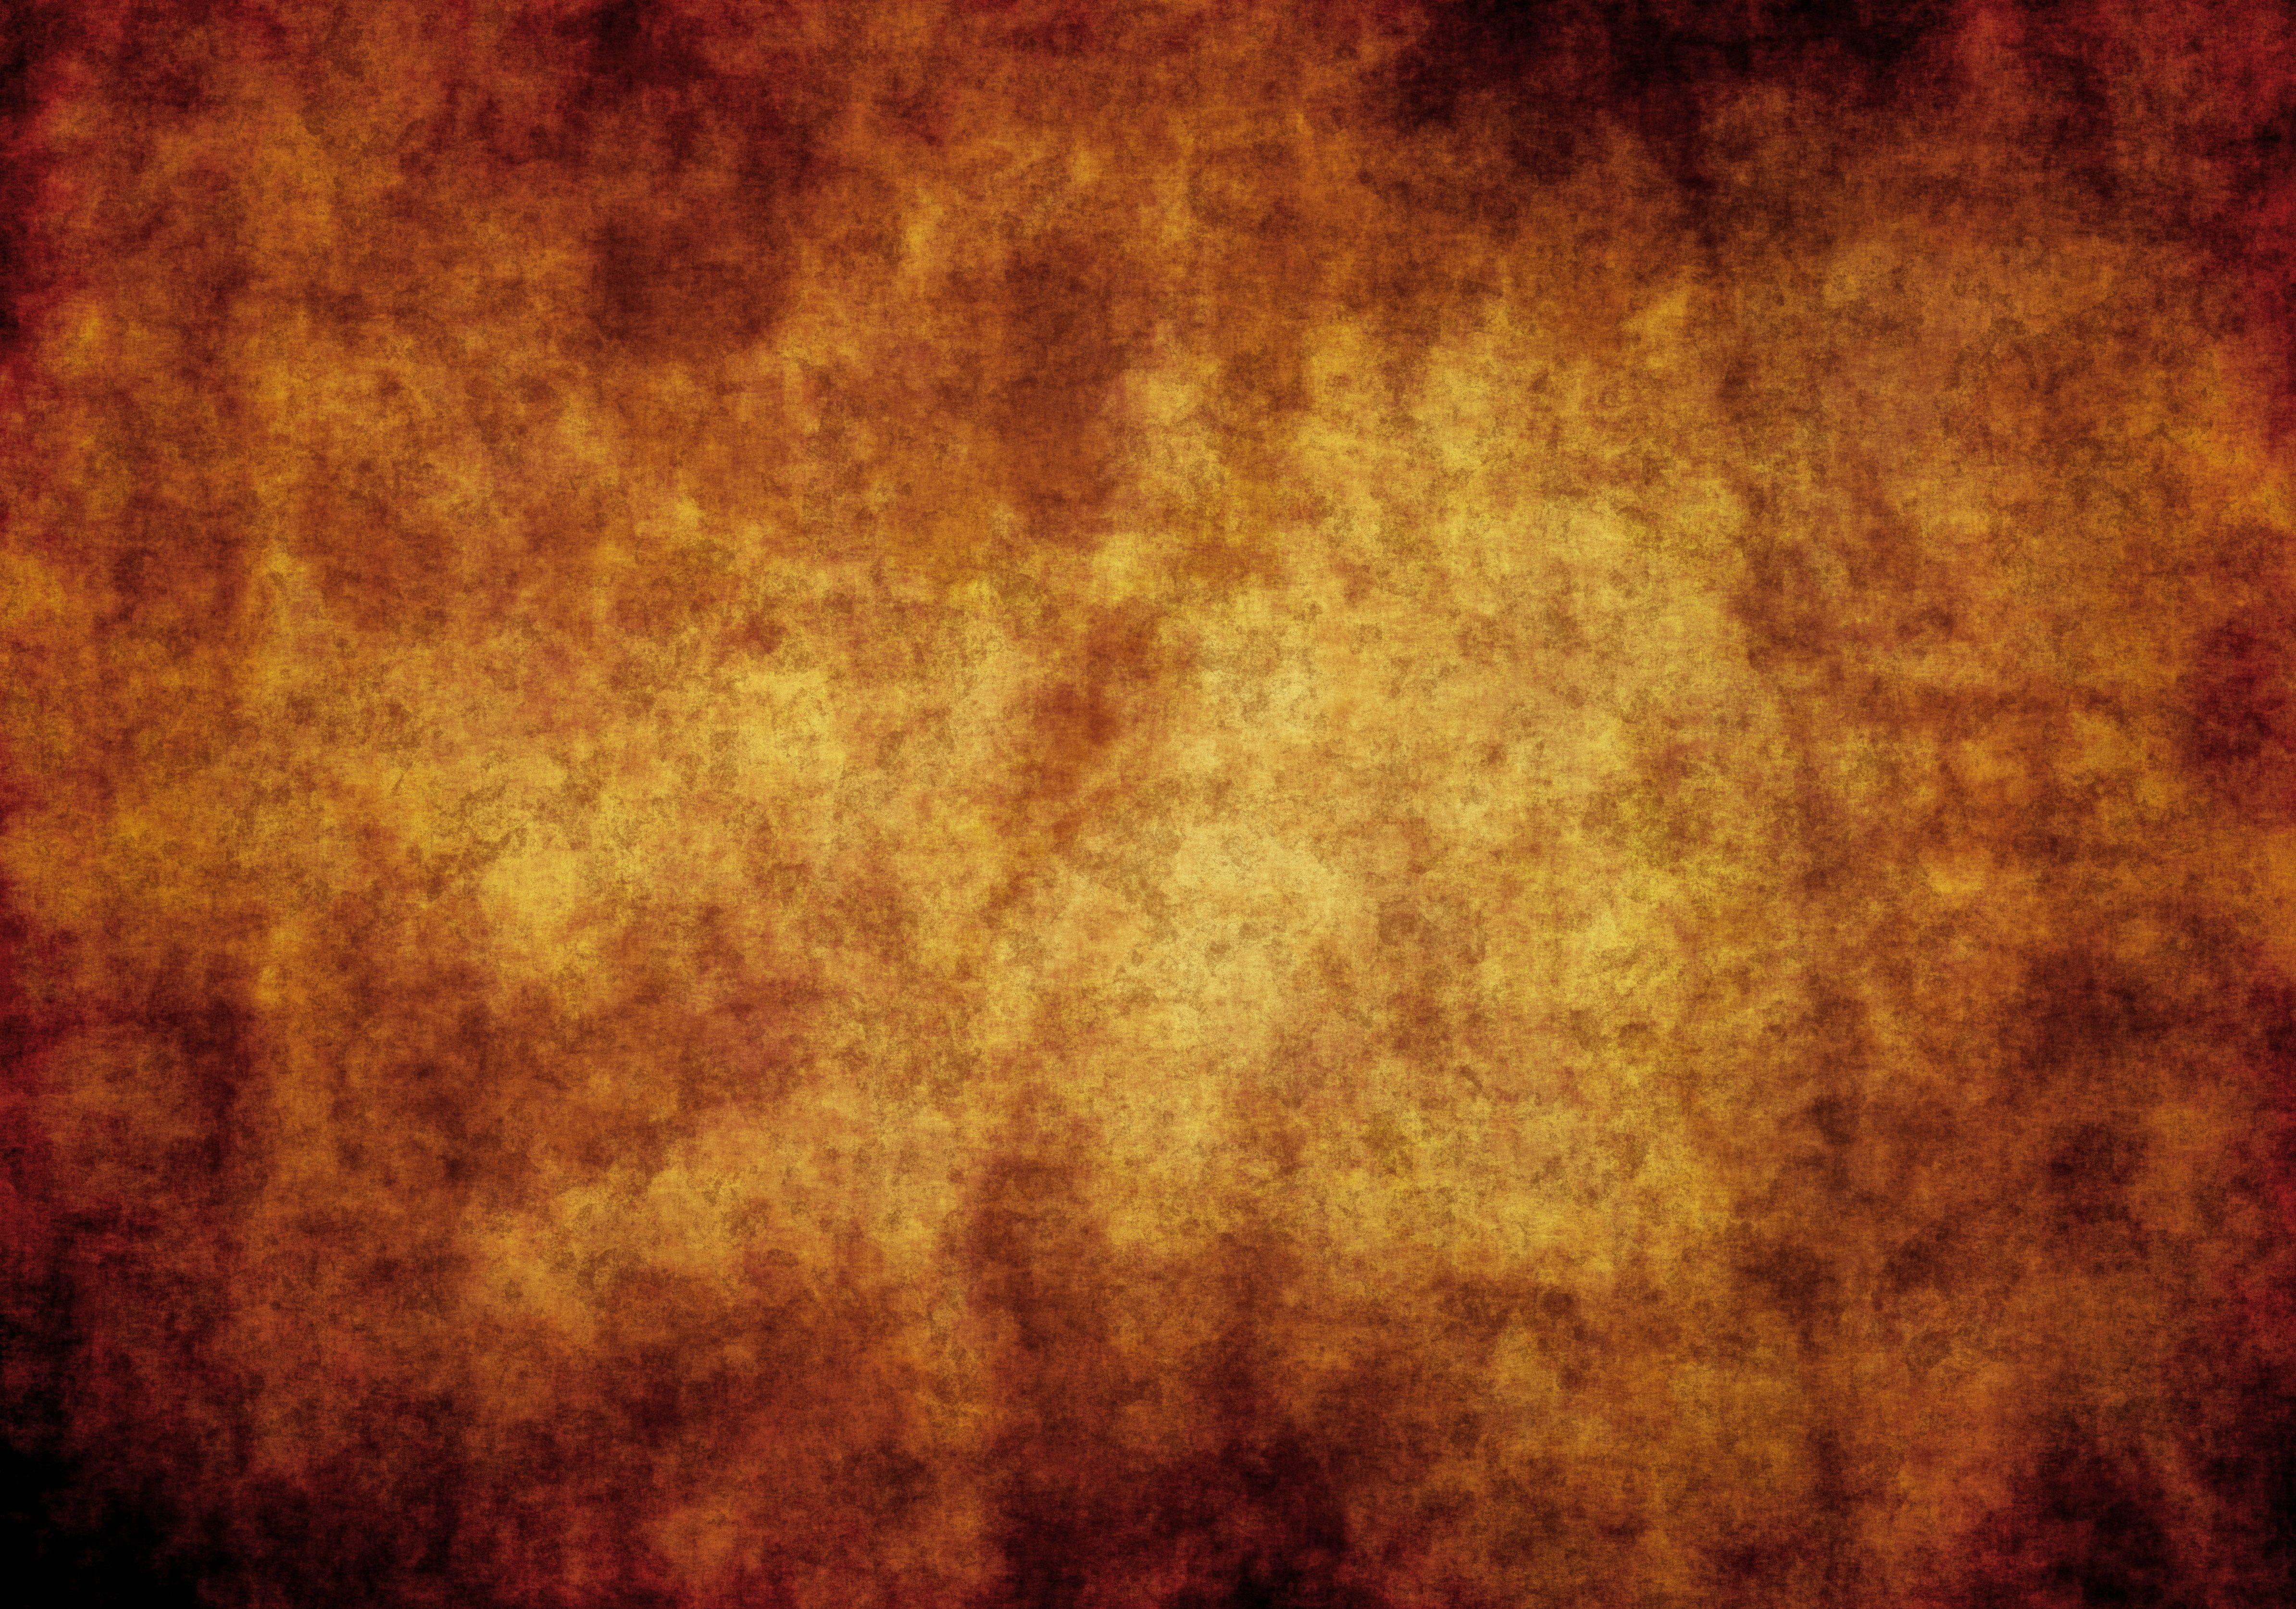 Abstract Grunge Background Texture in Brown and Red